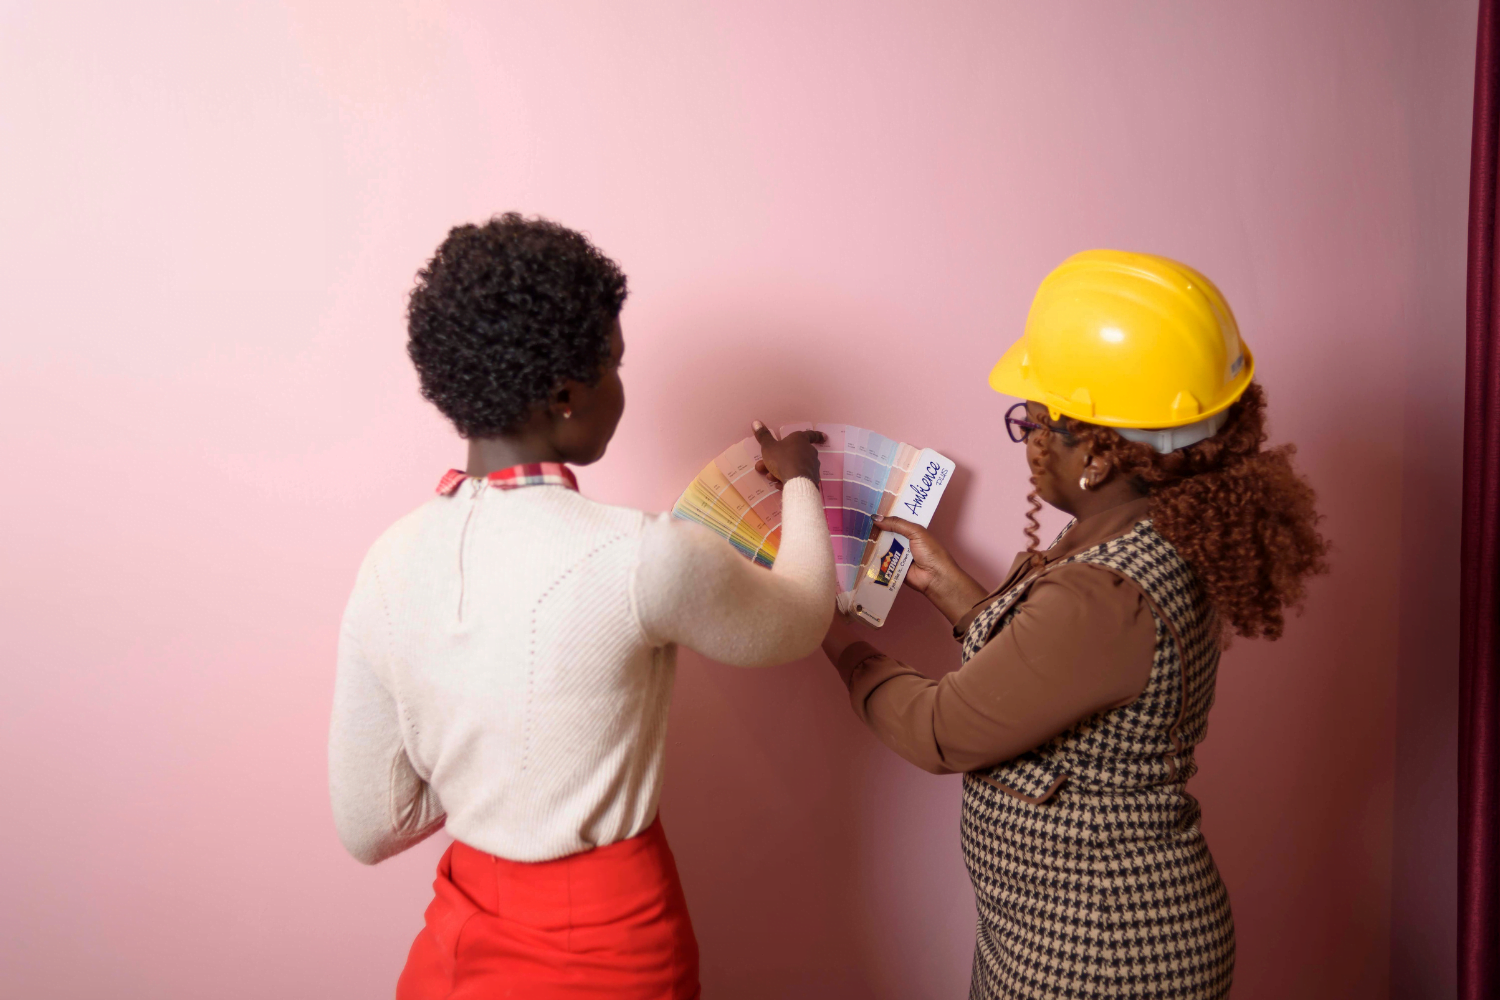 Gill Ingosi shows a client some color samples while in front of a pink wall